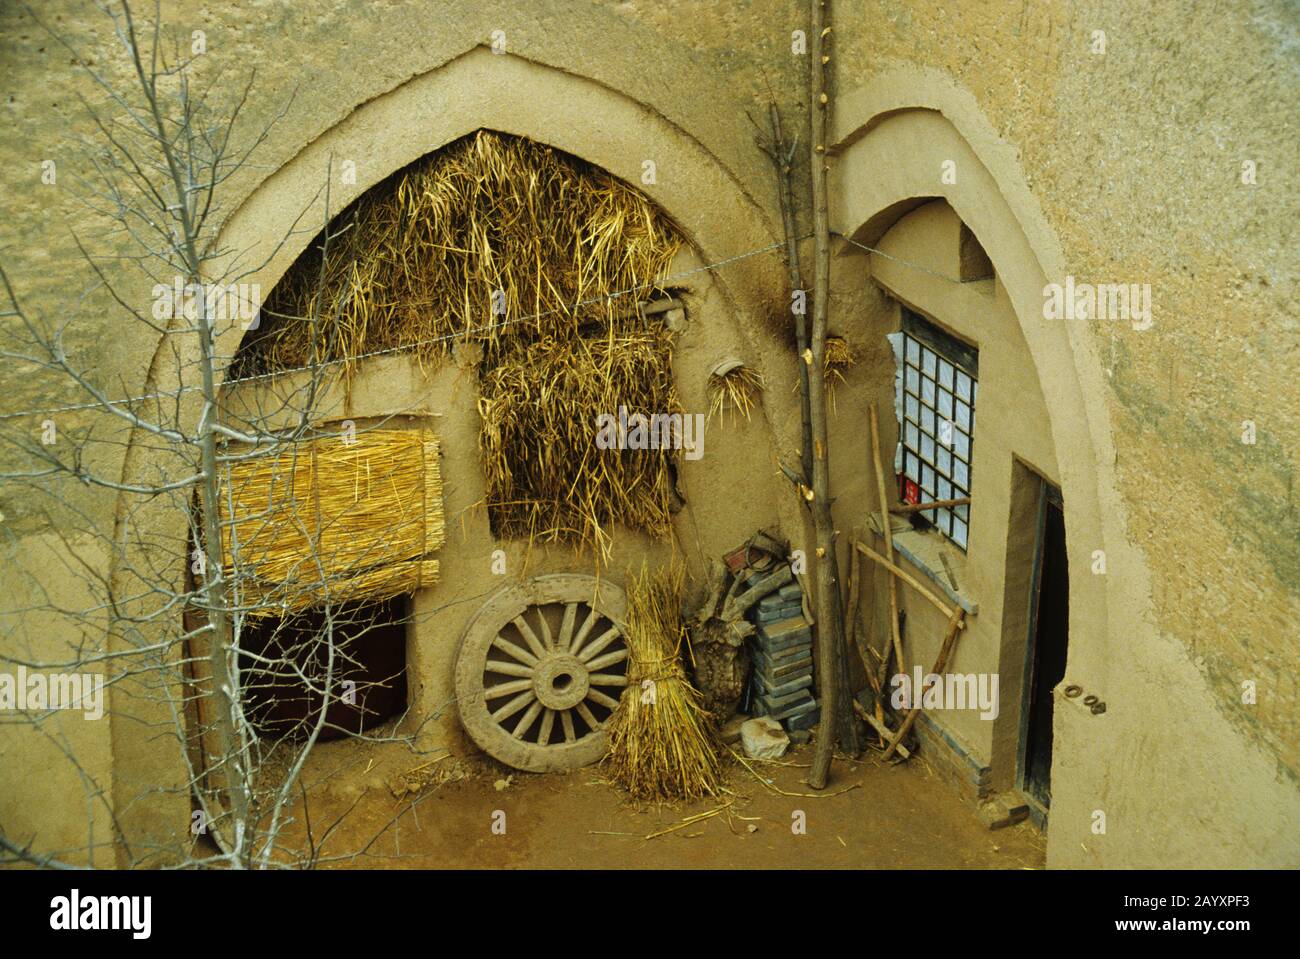 View of underground dwellings dug into Loess serving as interior courtyard, called yaodong-well or sunken courtyard near the city of Xian, China. Stock Photo